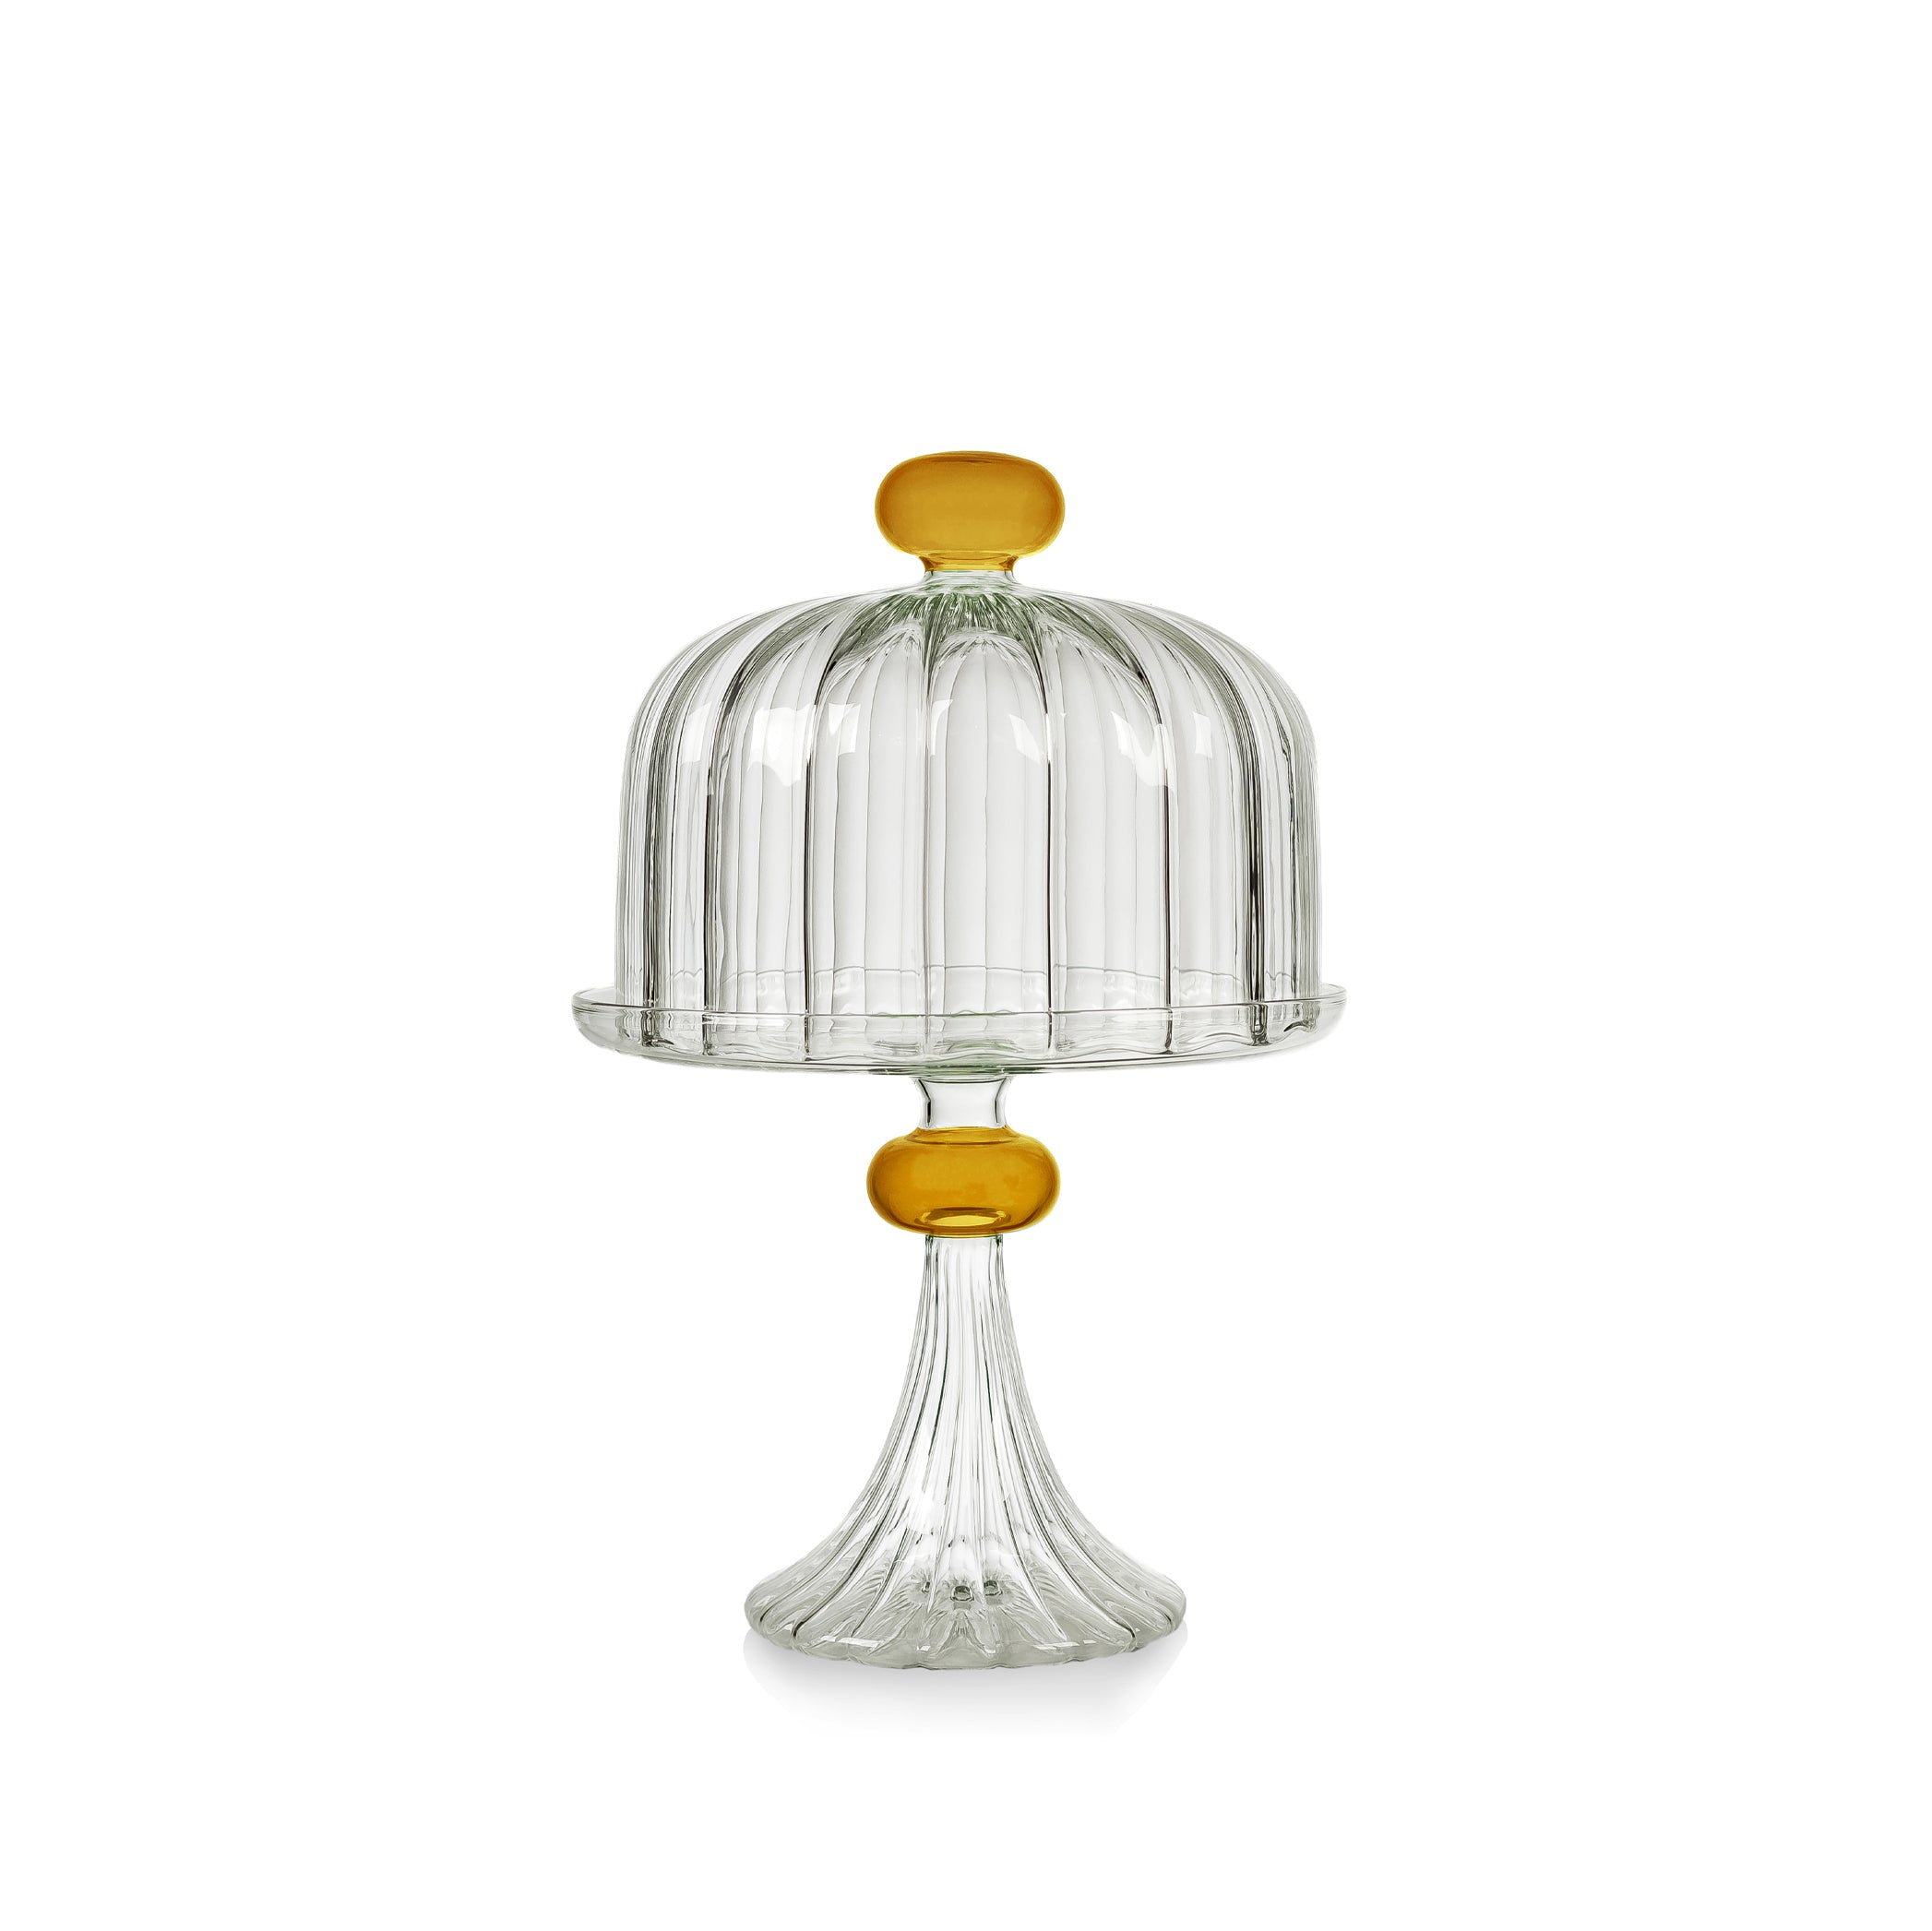 Verona Cake Stand and Dome in Yellow, 25.5cm x 21cm